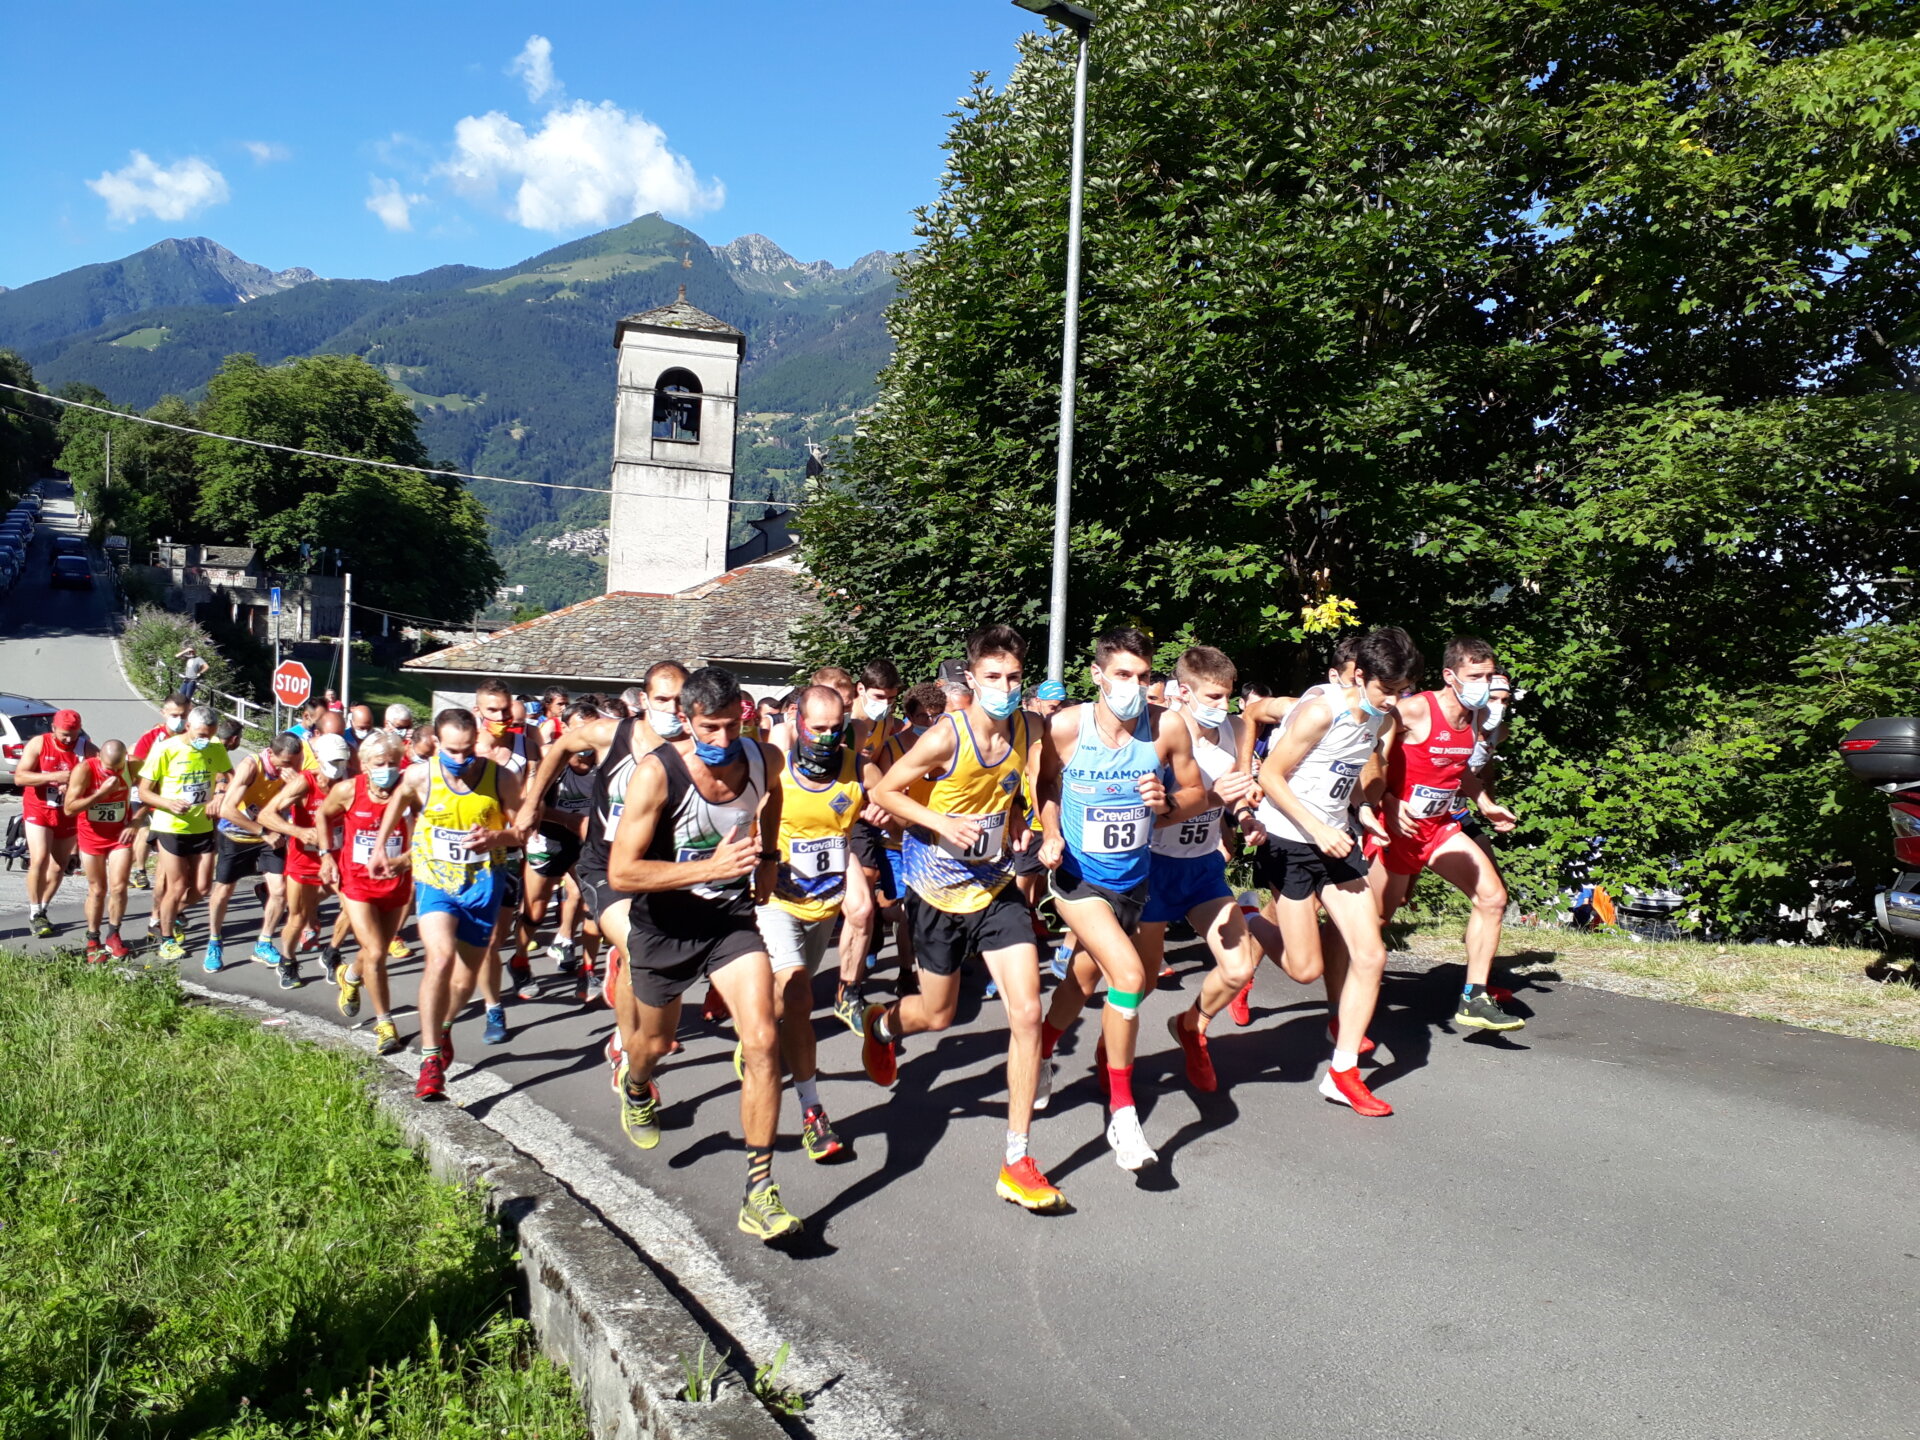 Evergreen Educational Farm Trophy: Marco Leoni is strong for three wins and Christina Molteni is strong in mountain running

